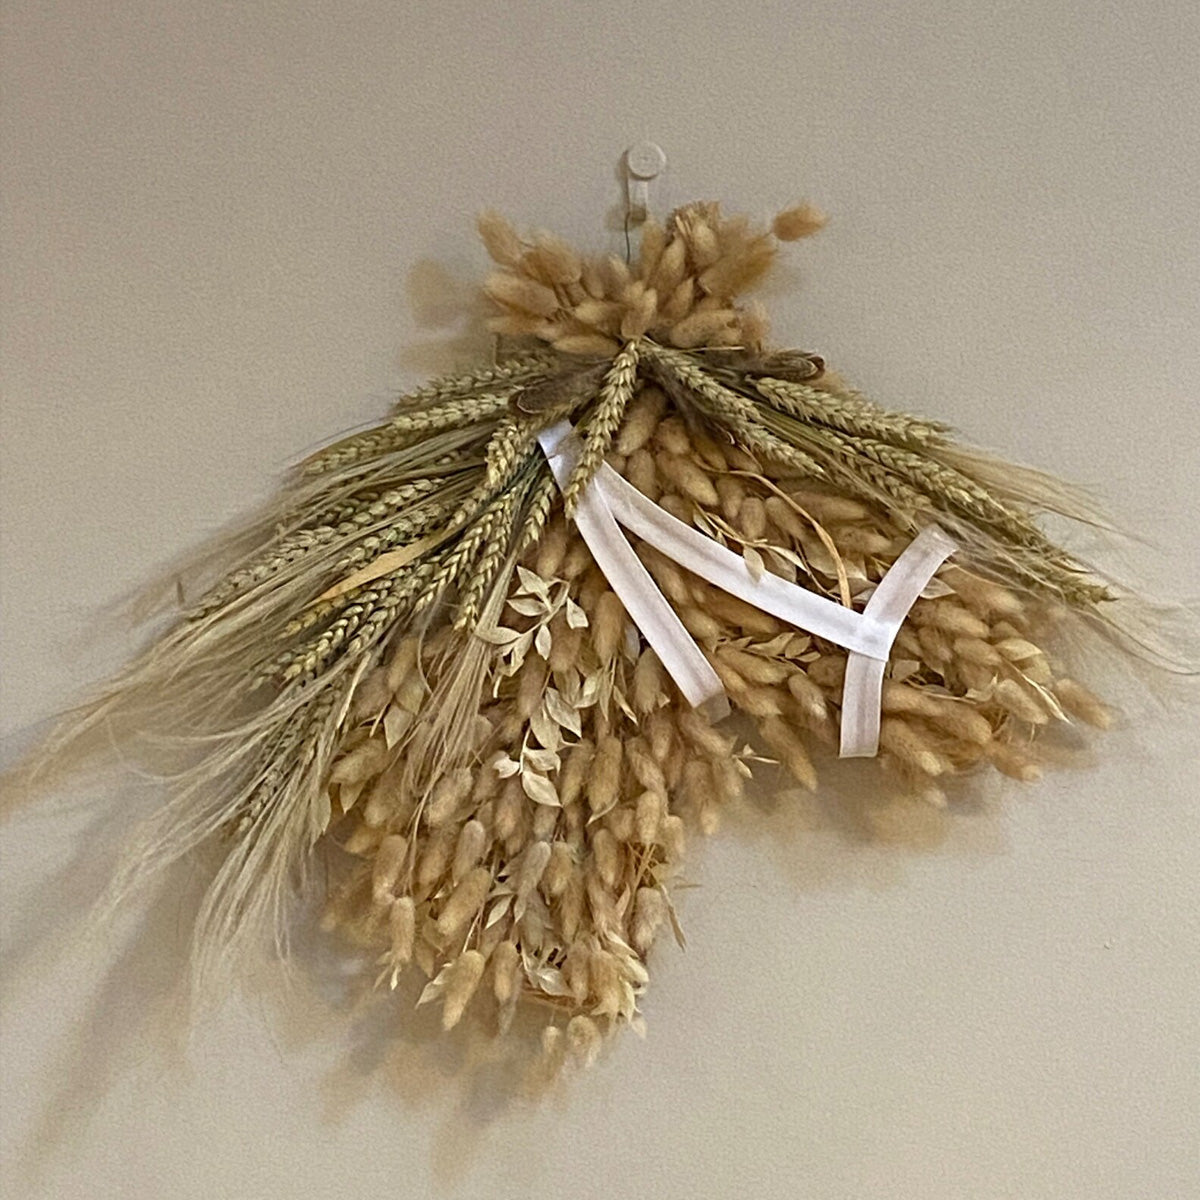 Dried and Preserved Flowers Horses Head wall decoration